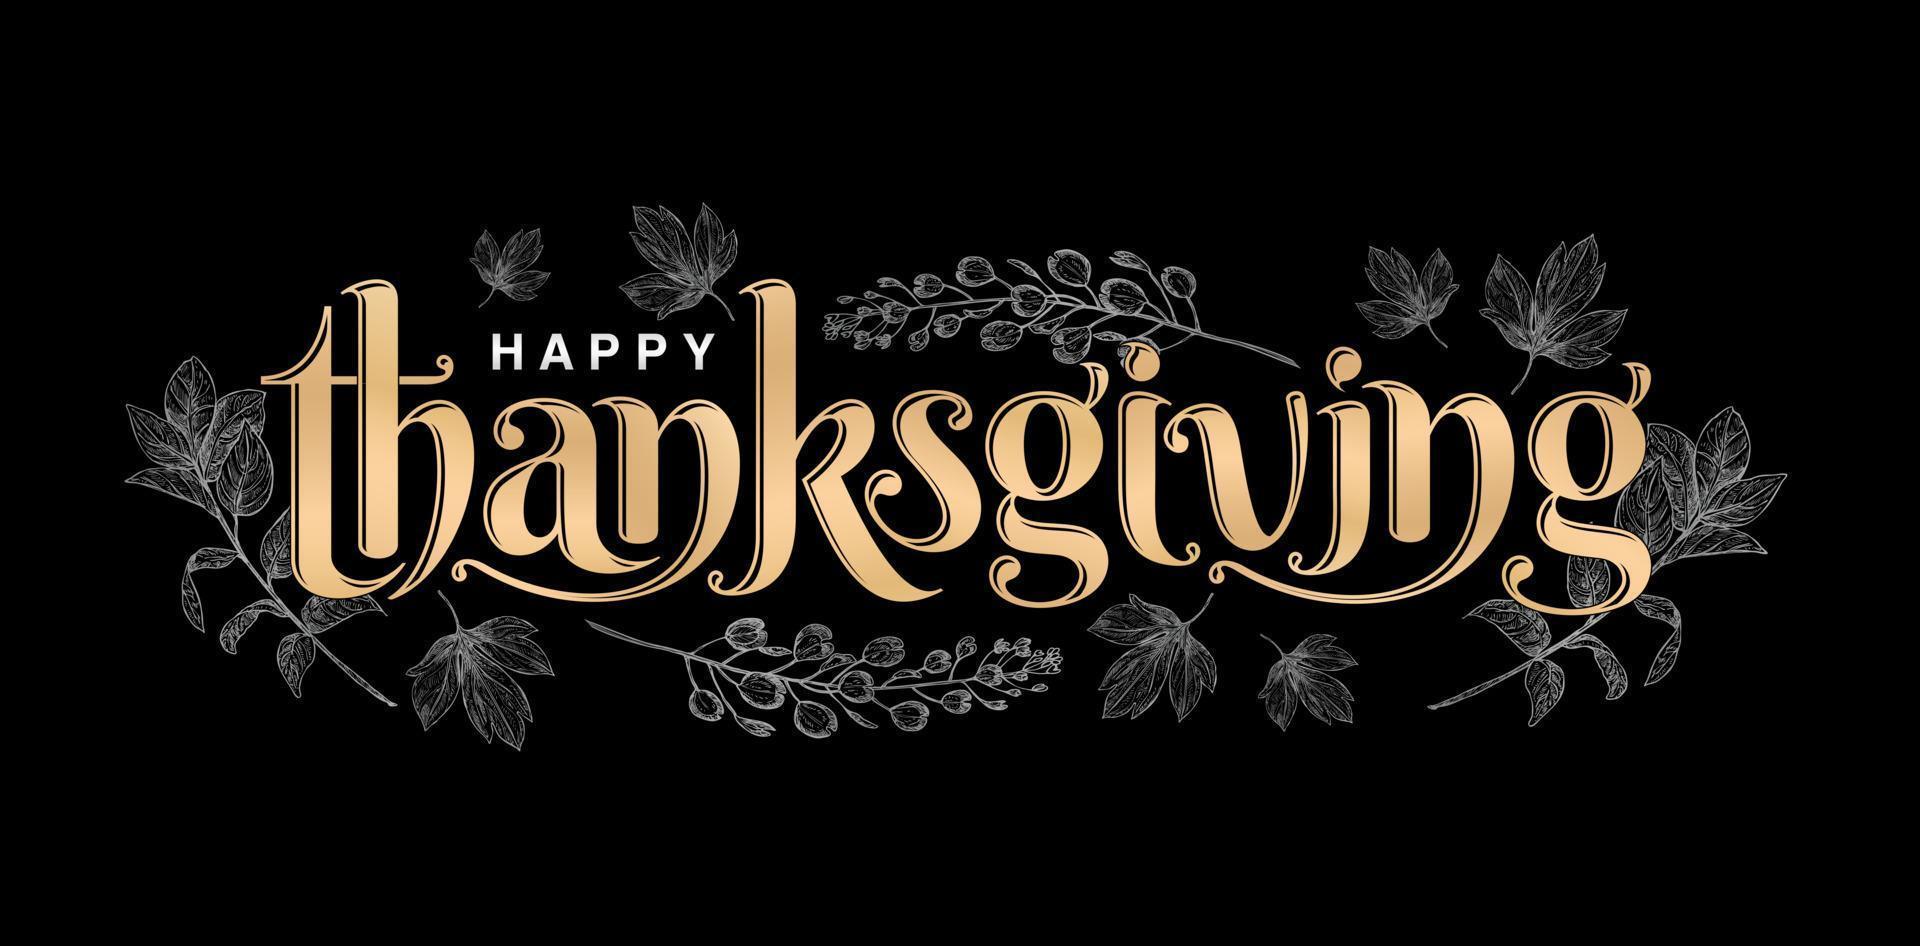 illustration of Happy THANKSGIVING lettering fonts golden color with isolated black background, happy thanksgiving illustration with floral pattern, for greeting cards, invitation, sign and banners. vector